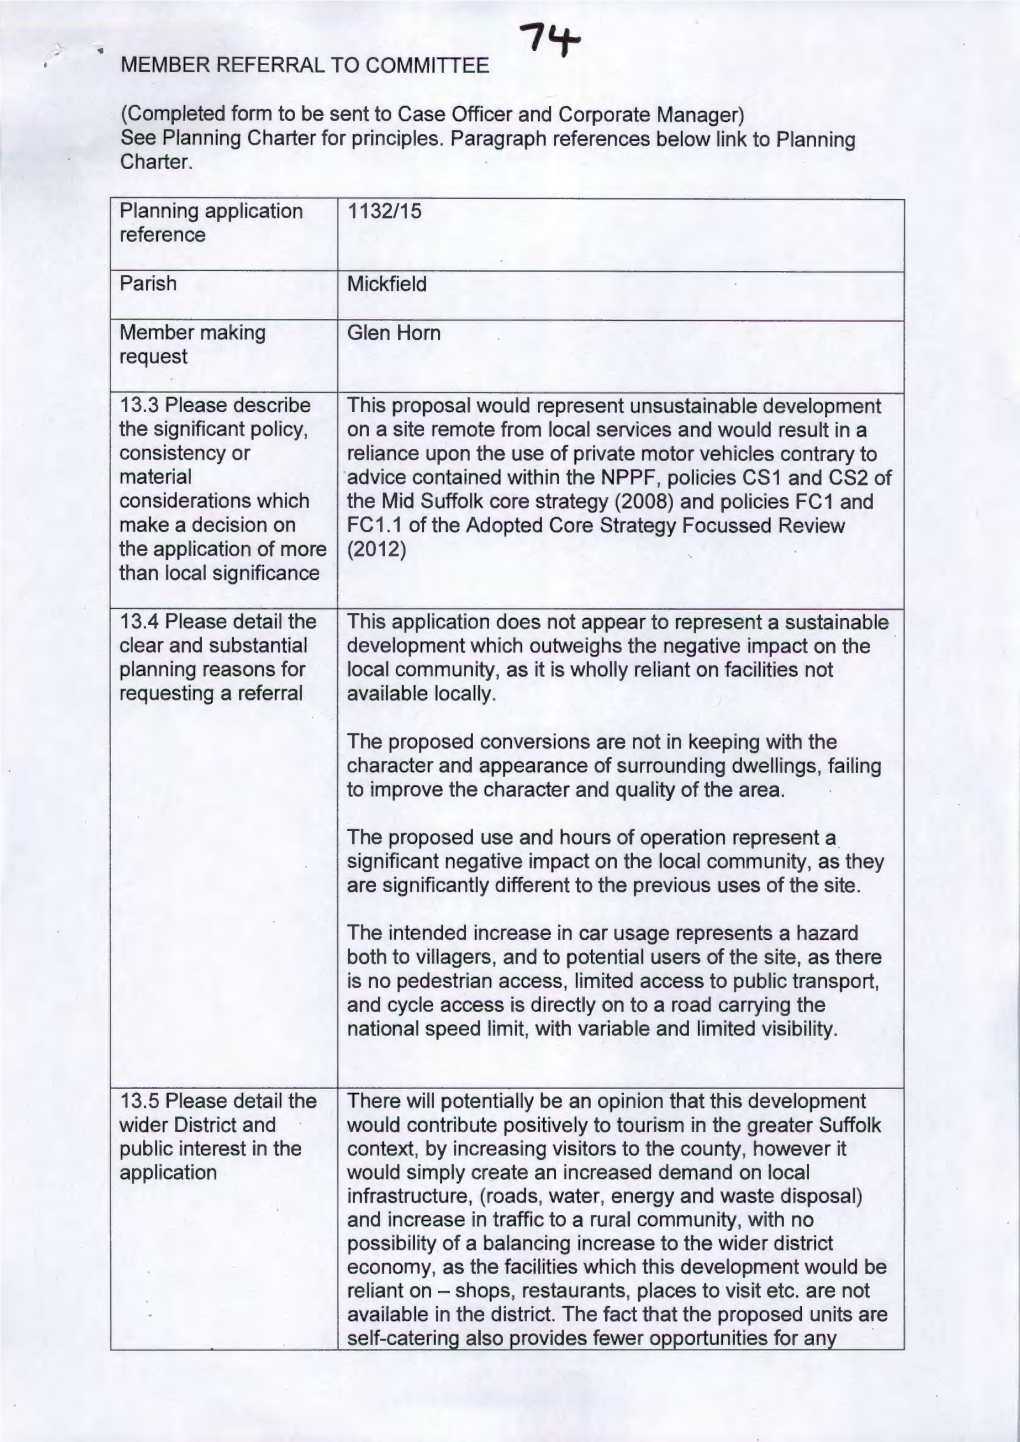 Completed Form to Be Sent to Case Officer and Corporate Manager) See Planning Charter for Principles